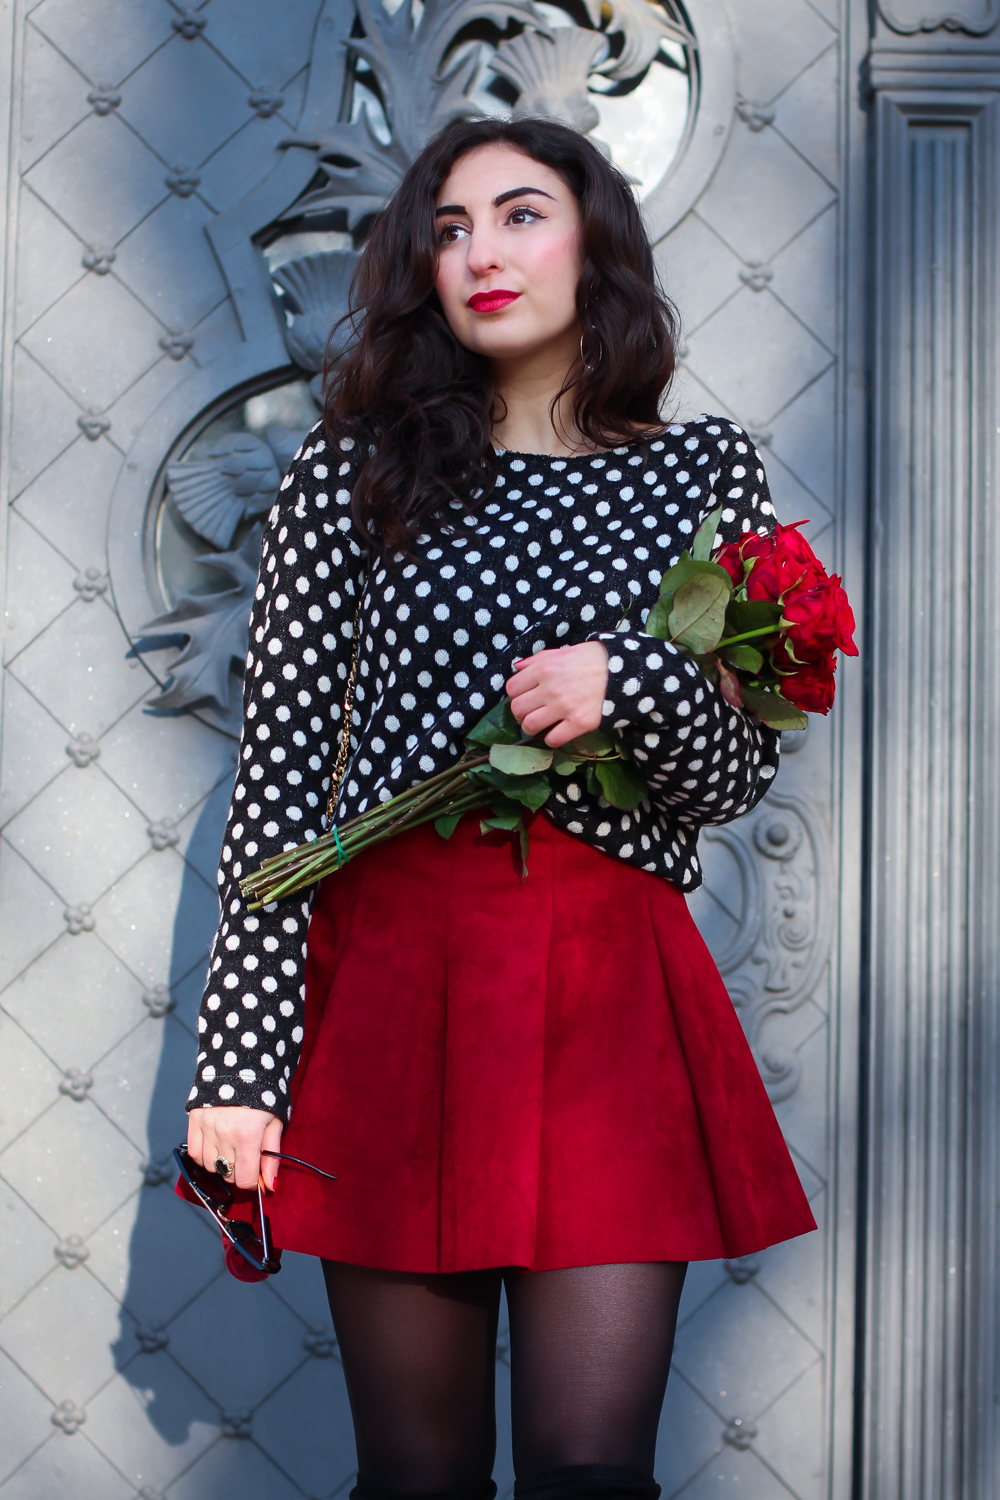 valentines day outfit inspiration romantic date outfit valentinstag red skater skirt and dots modeblog berlin fashionblog samieze winterlook-2